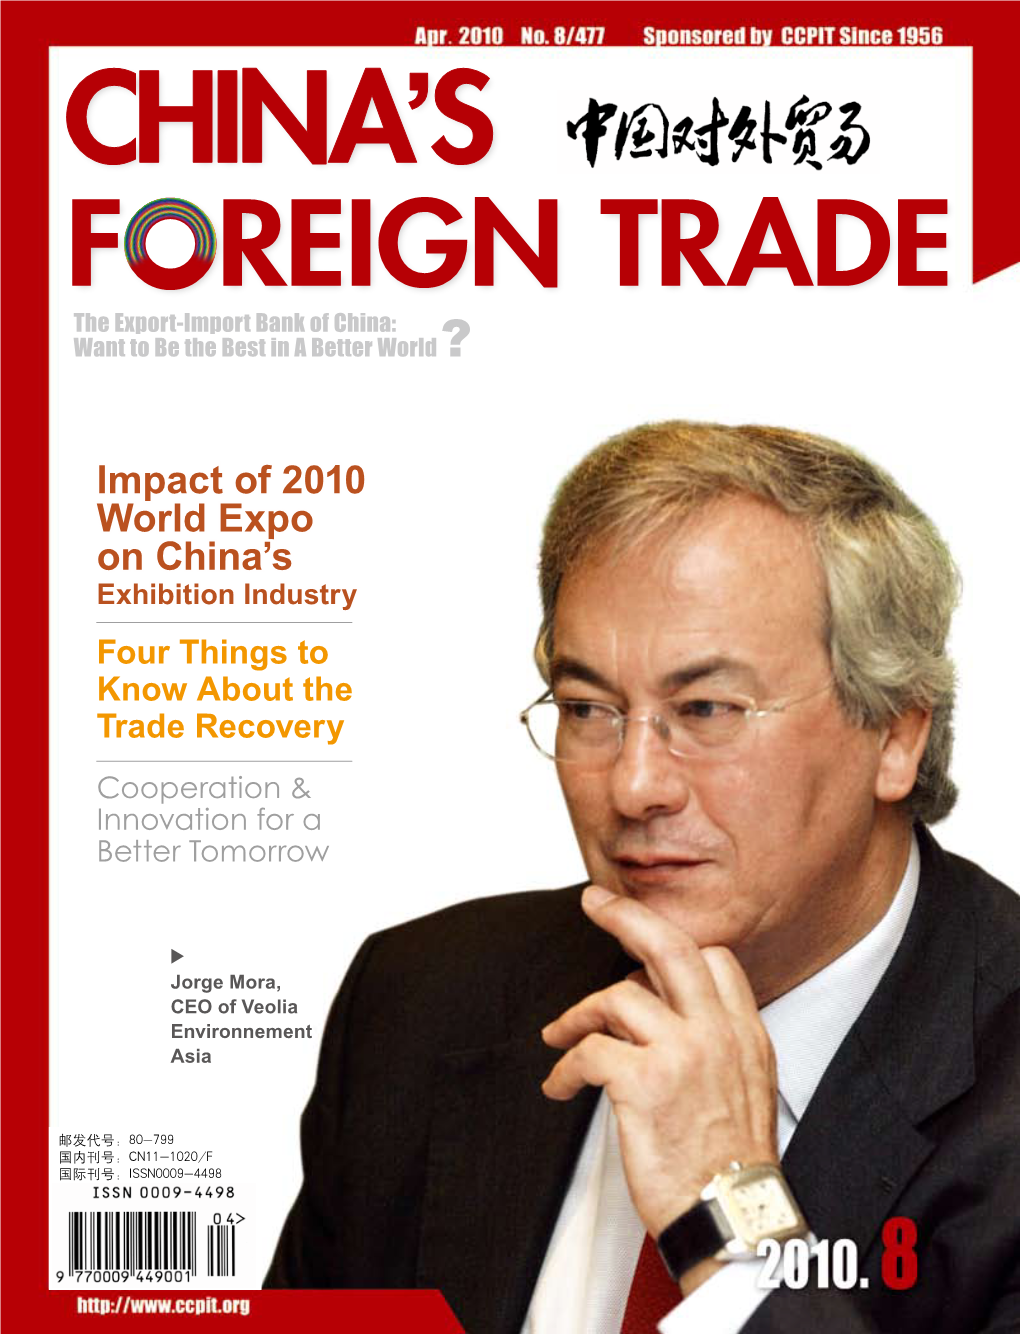 F REIGN TRADE the Export-Import Bank of China: Want to Be the Best in a Better World ?